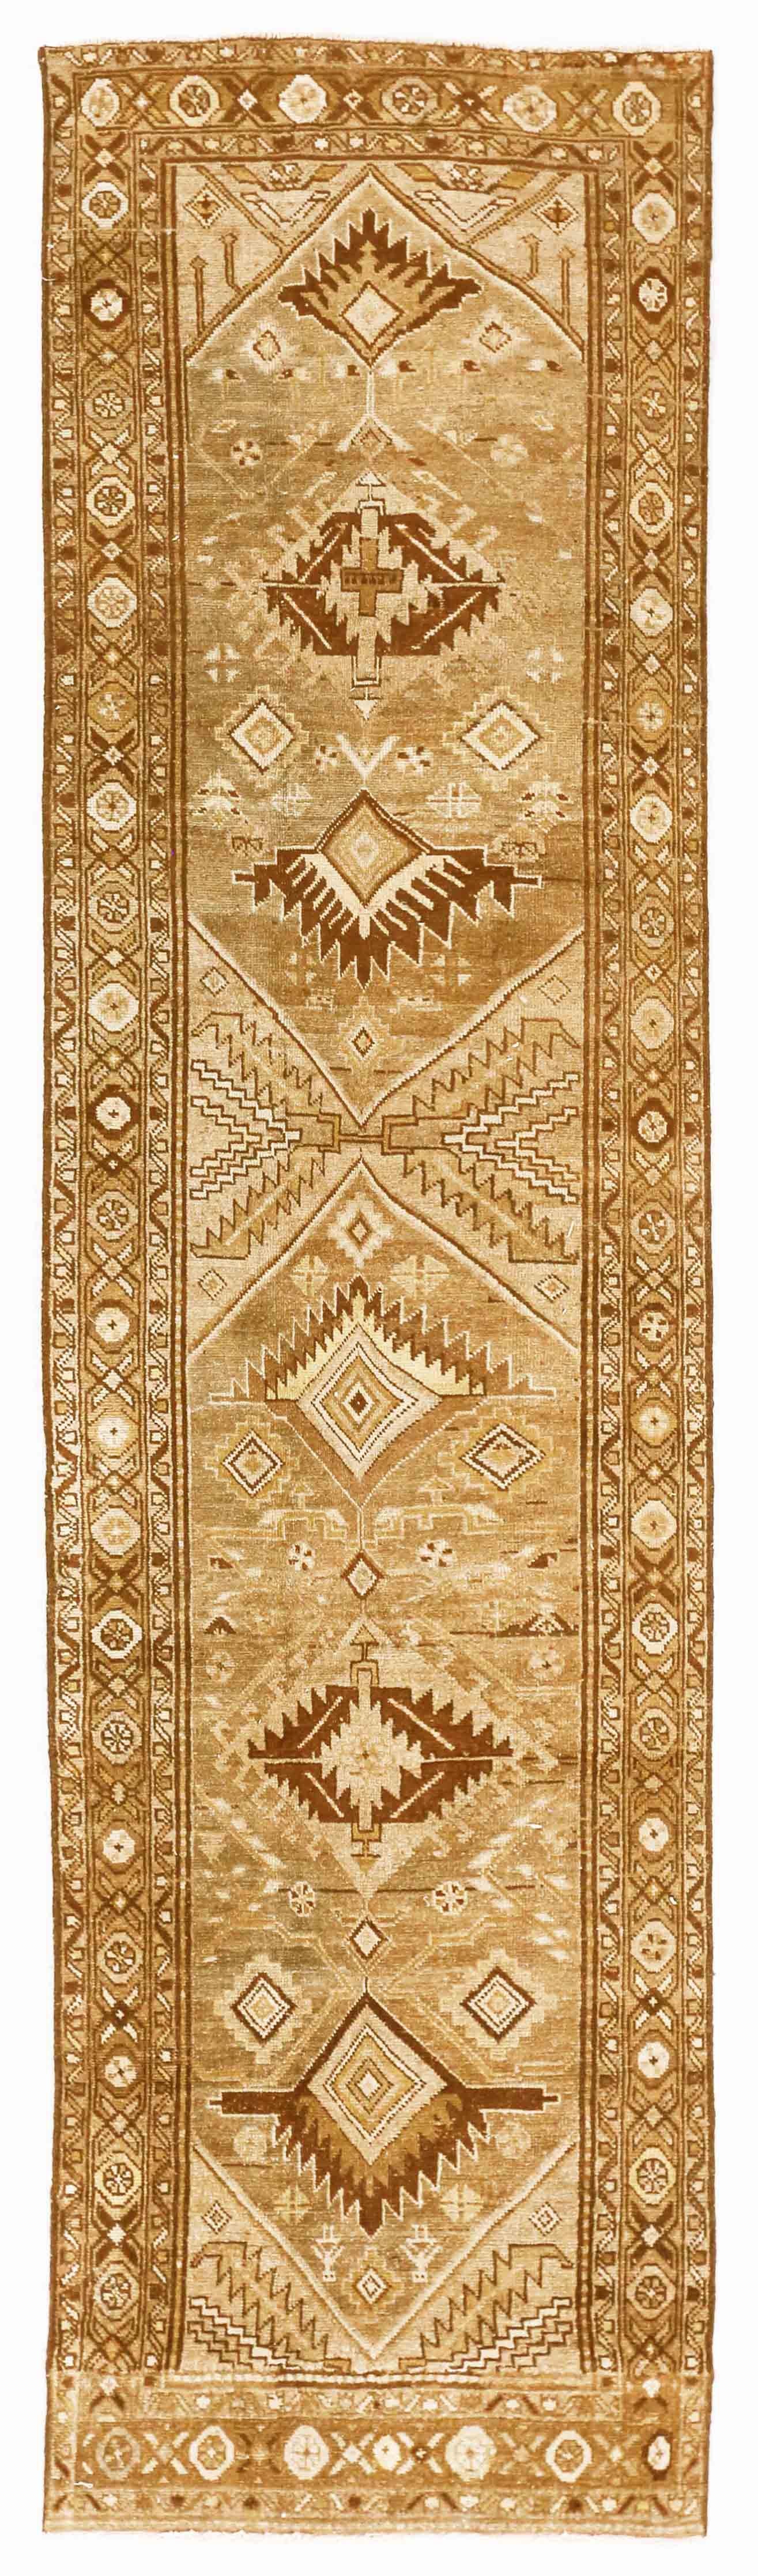 Antique Persian rug made from handspun, organic wool with fascinating geometric patterns popular in Azerbaijan rugs from the Caucasus region. It has a terrific blend of brown, beige, gray, and touches of green that will instantly draw attention to